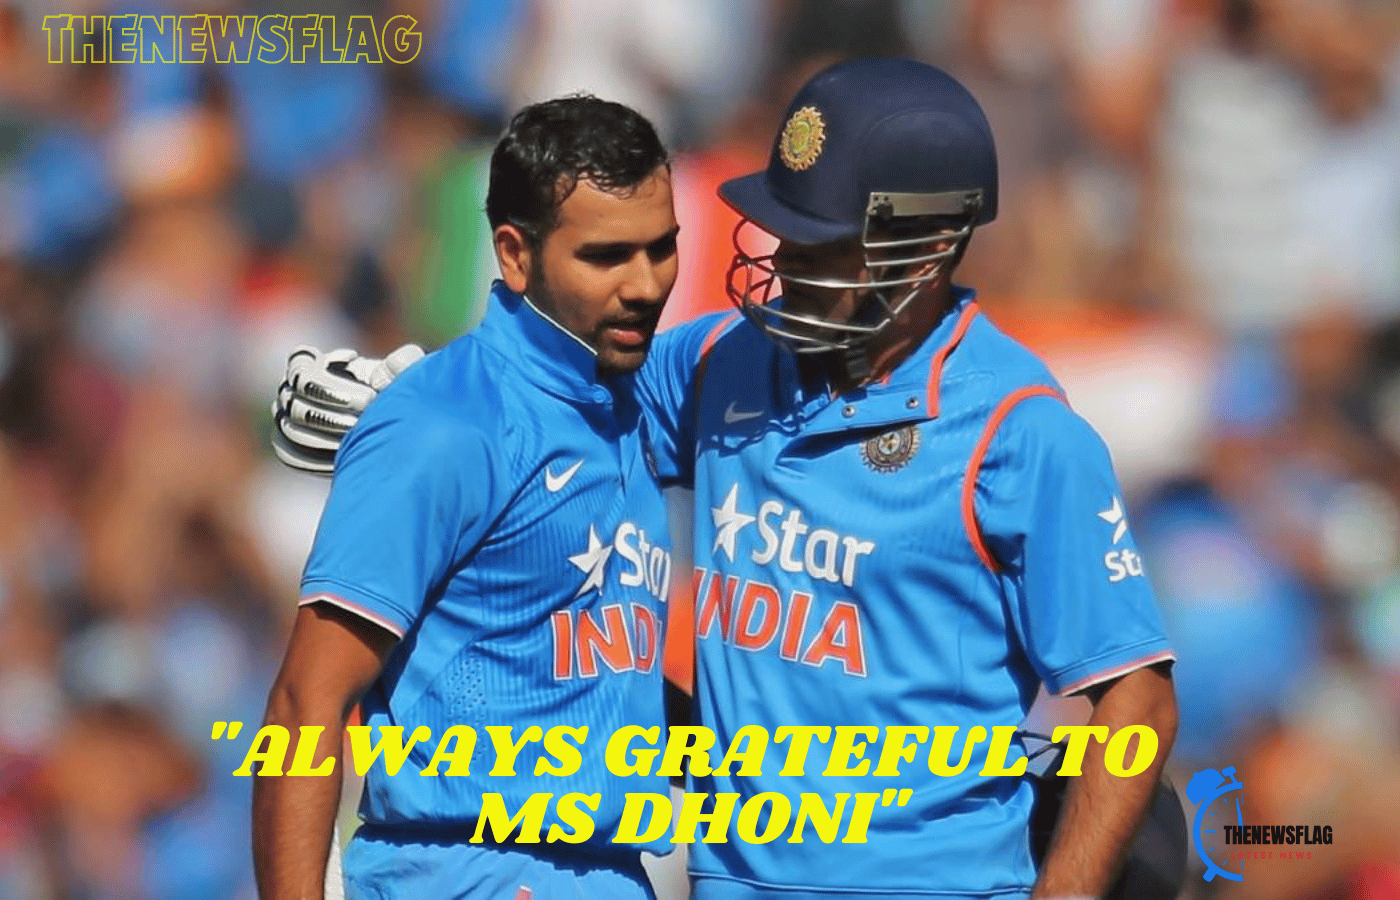 "Always grateful to MS Dhoni": R Ashwin remembers Captain Cool's assurance at the 2011 Indian Premier League Final